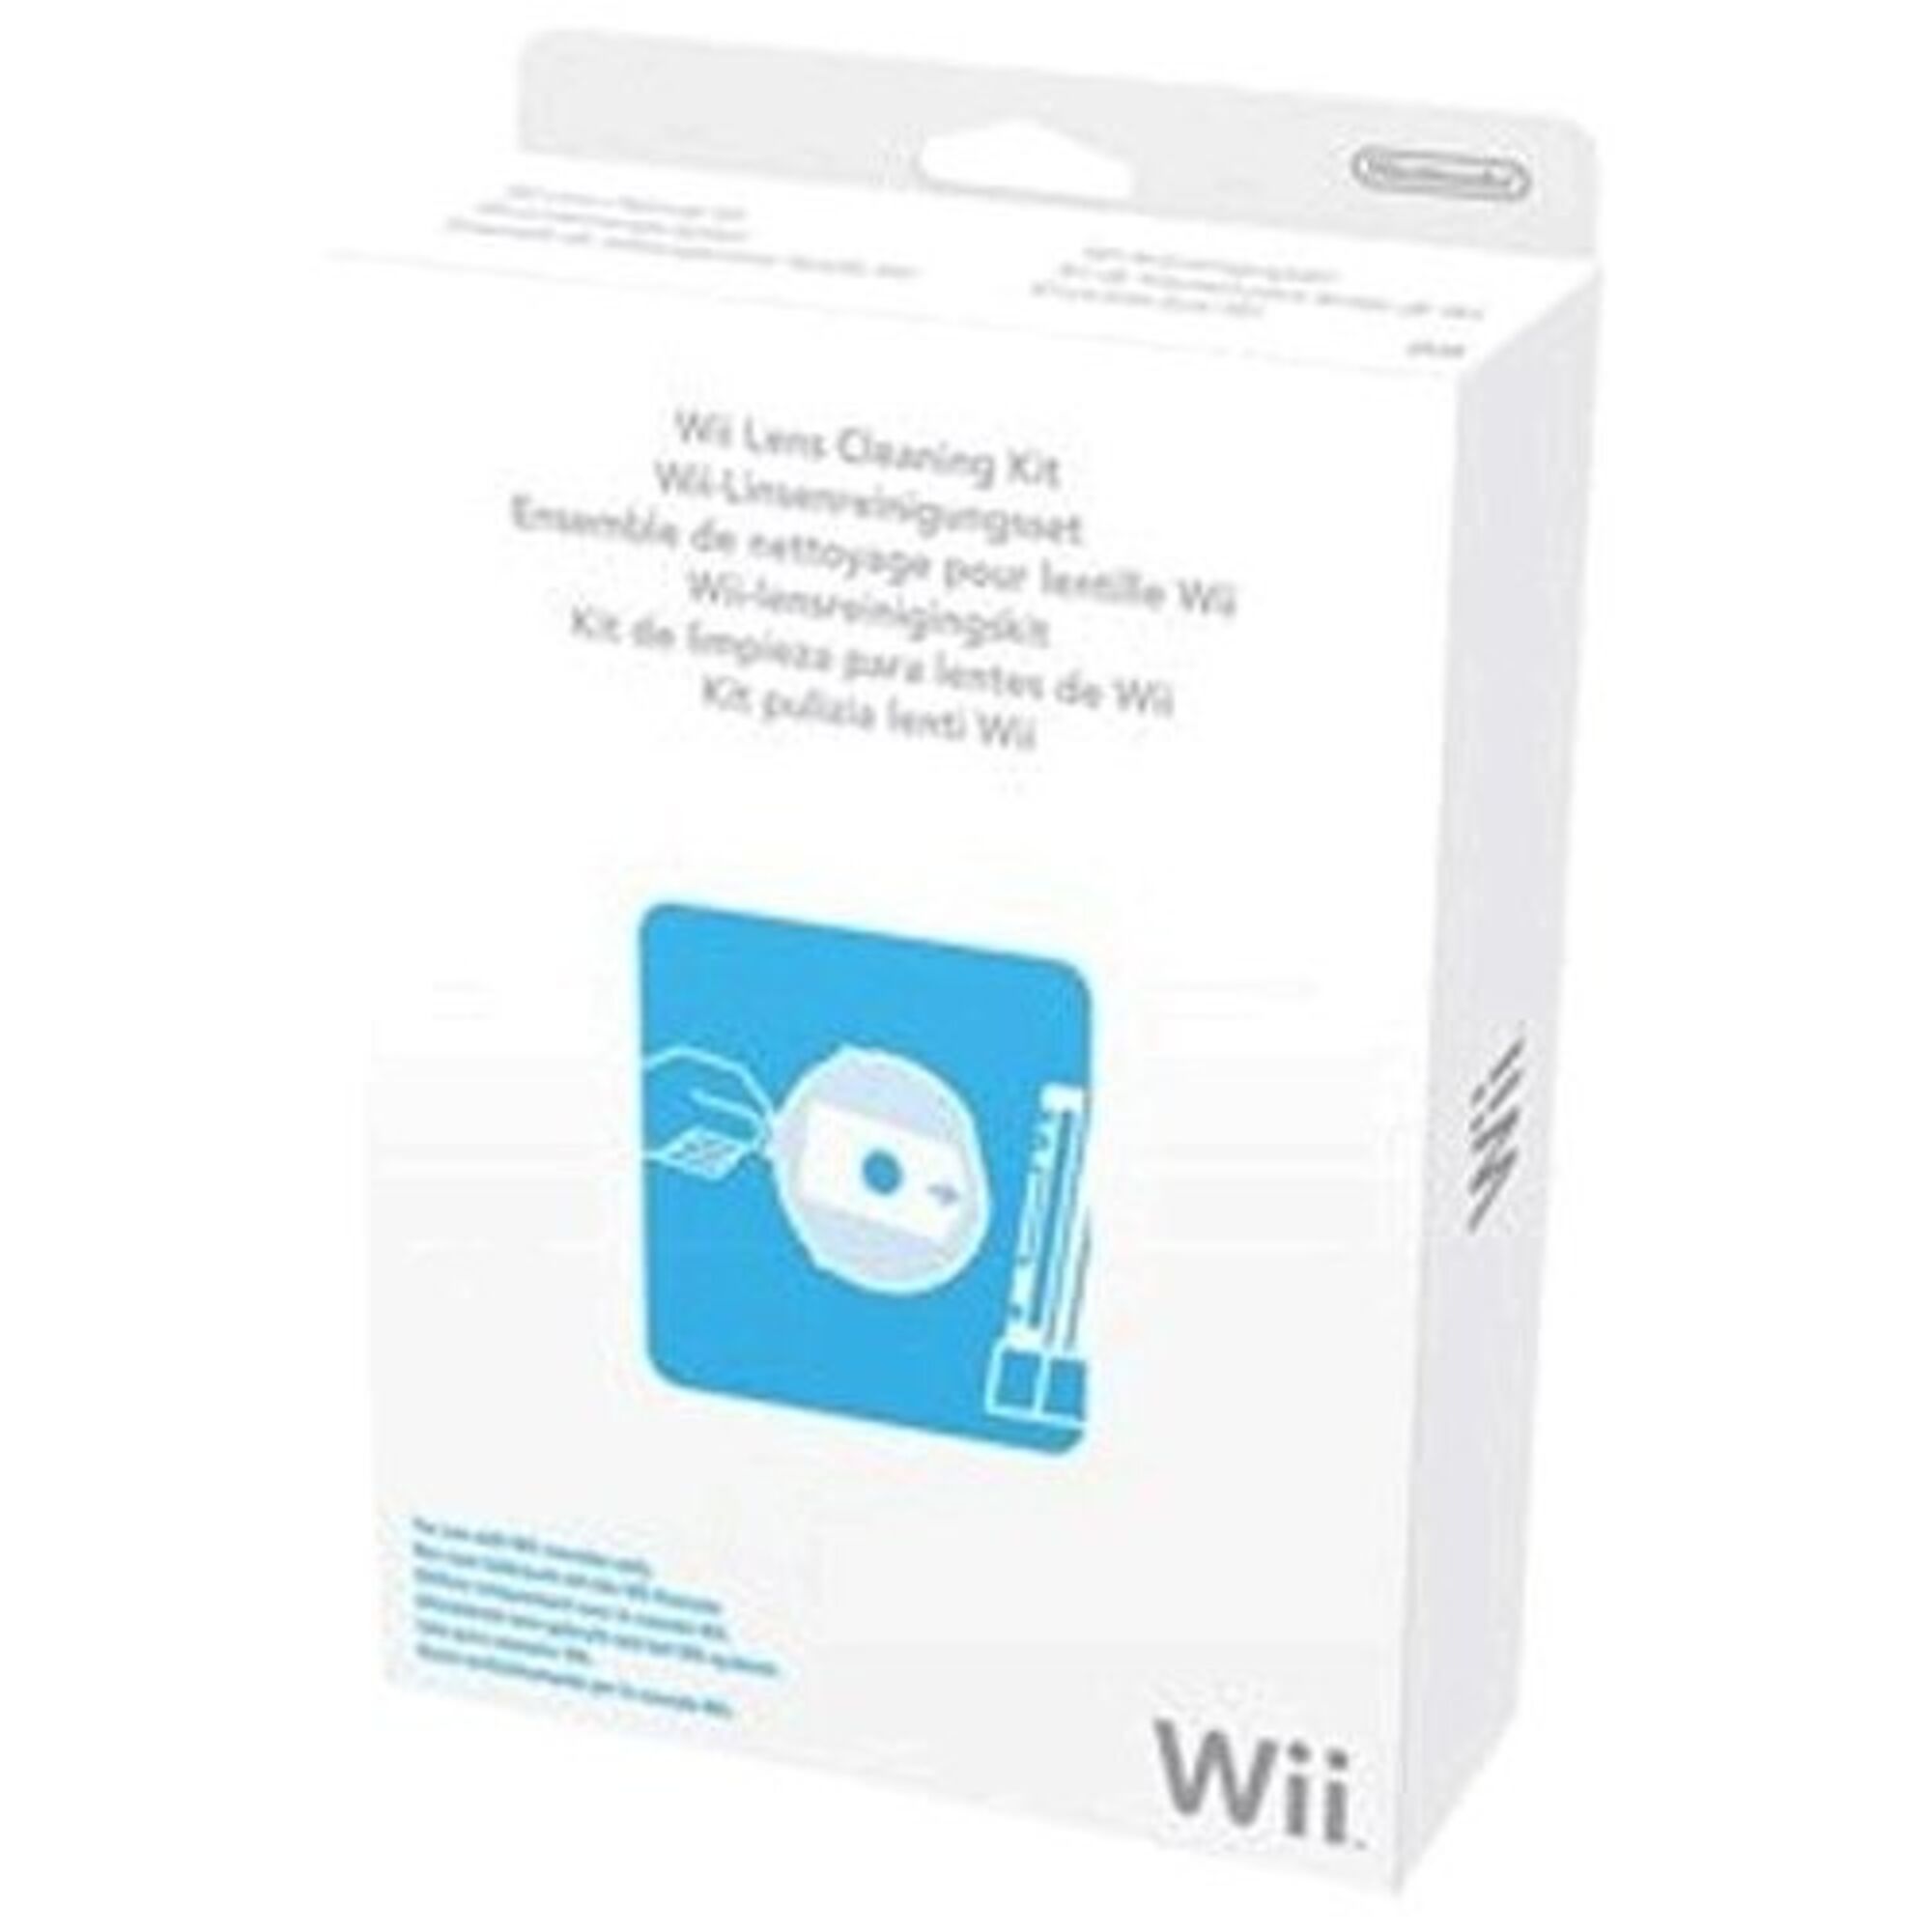 wii u cleaning lens